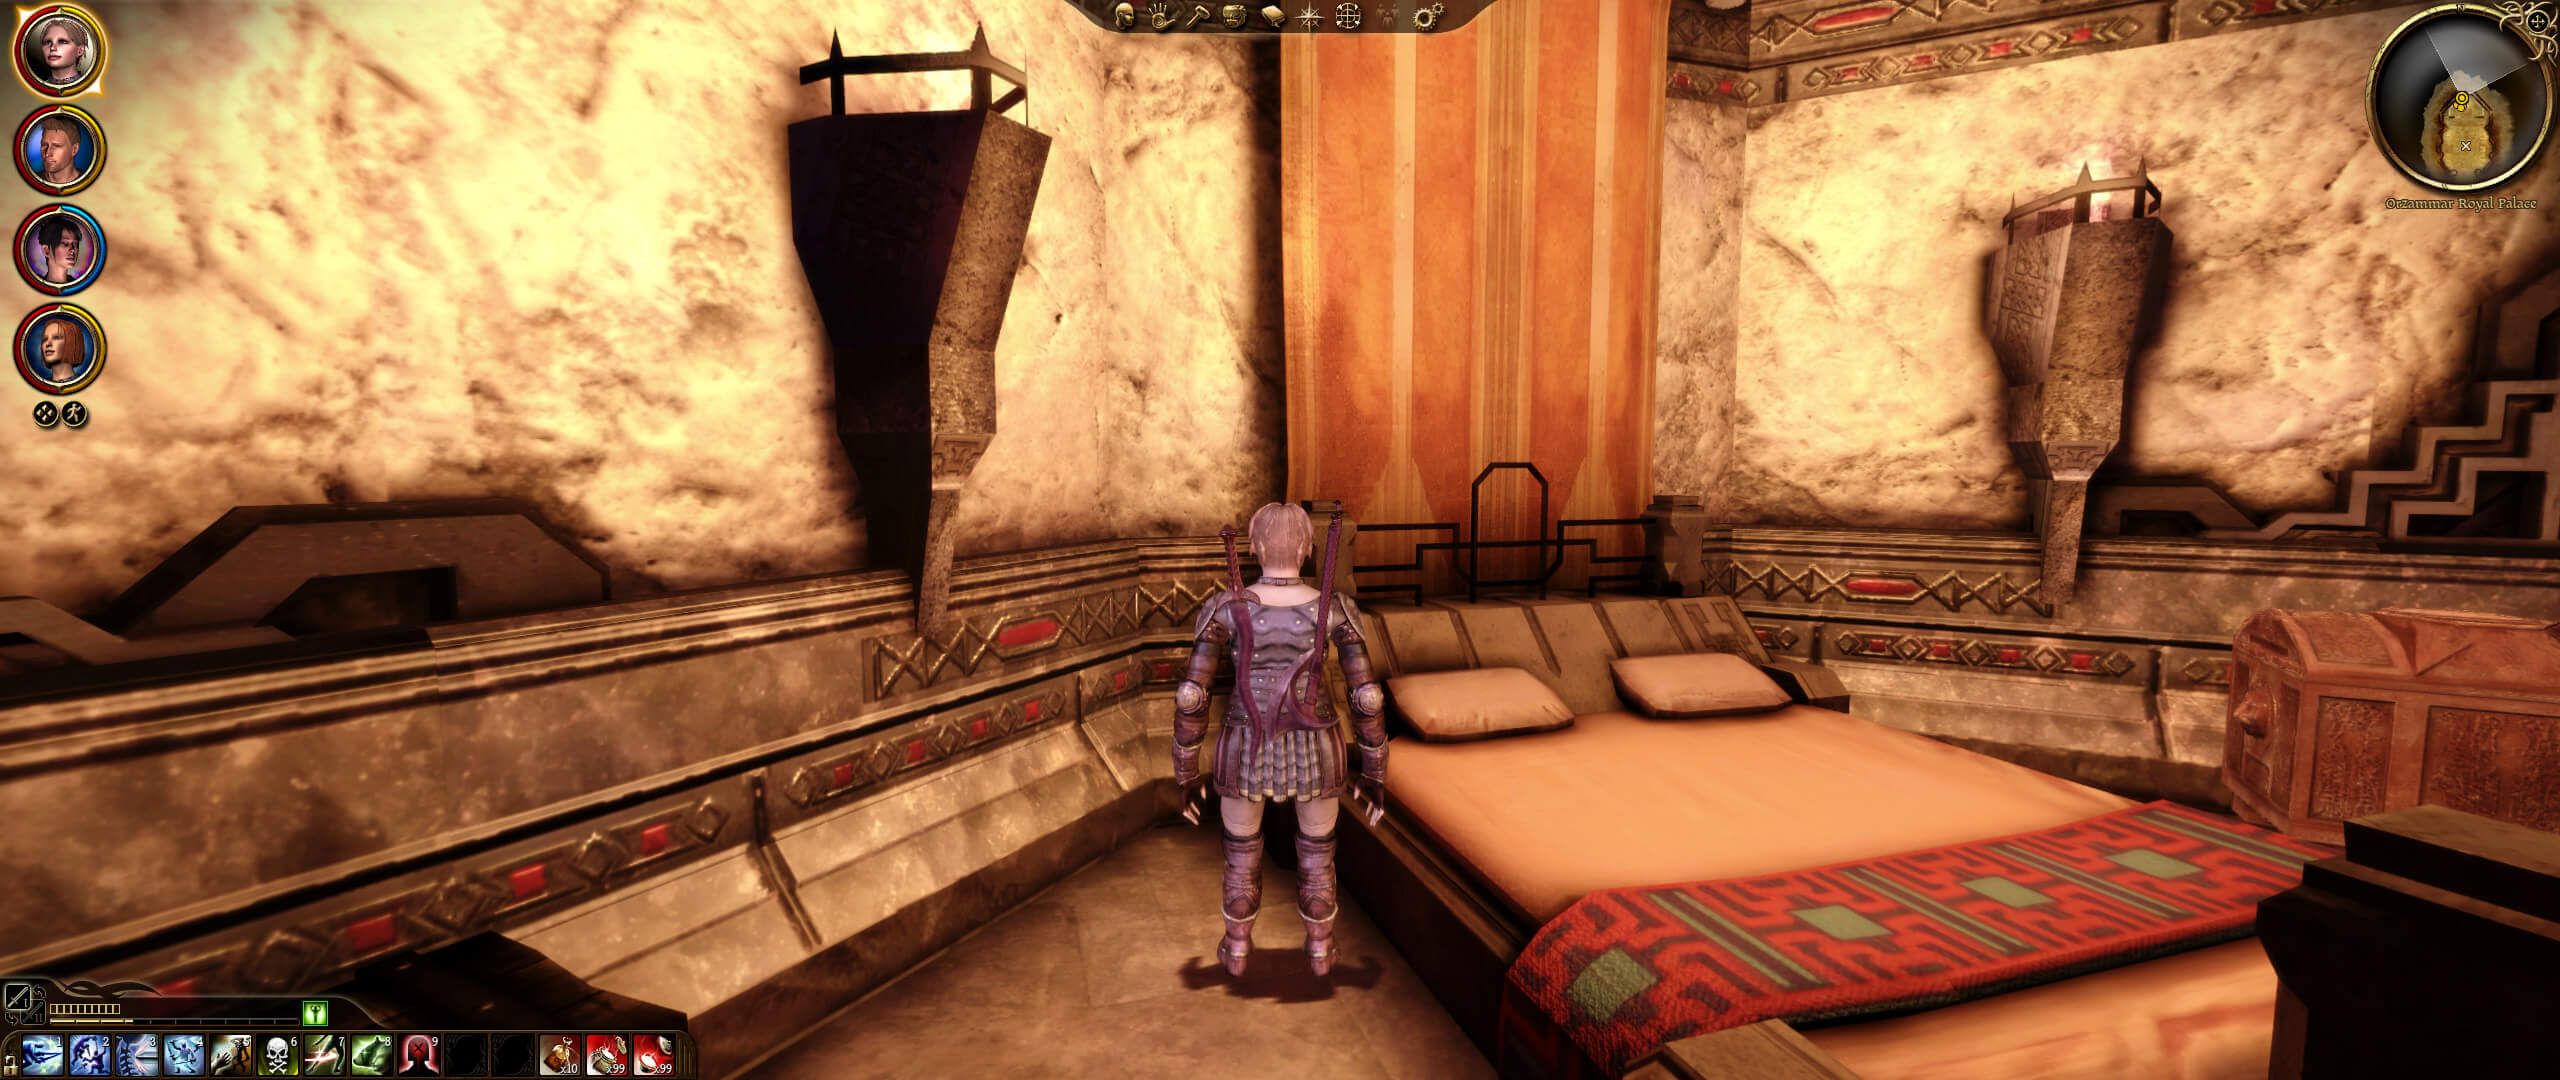 Dragon Age: Origins receives an AI-enhanced HD Texture Pack, improving over  2200 textures